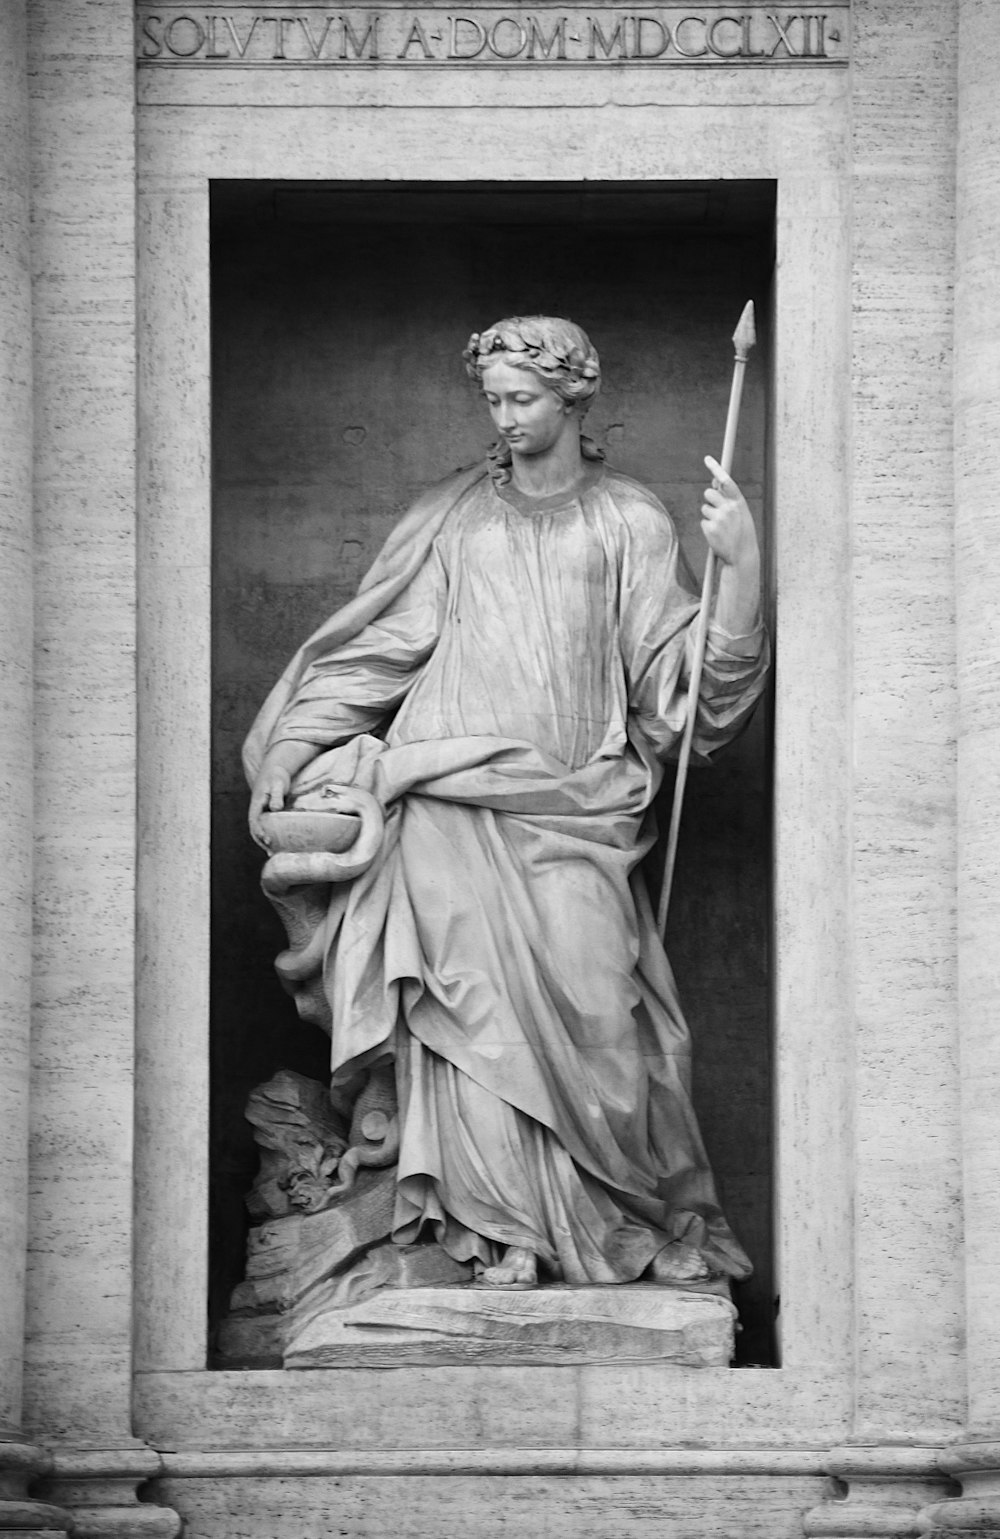 a statue of a man holding a staff